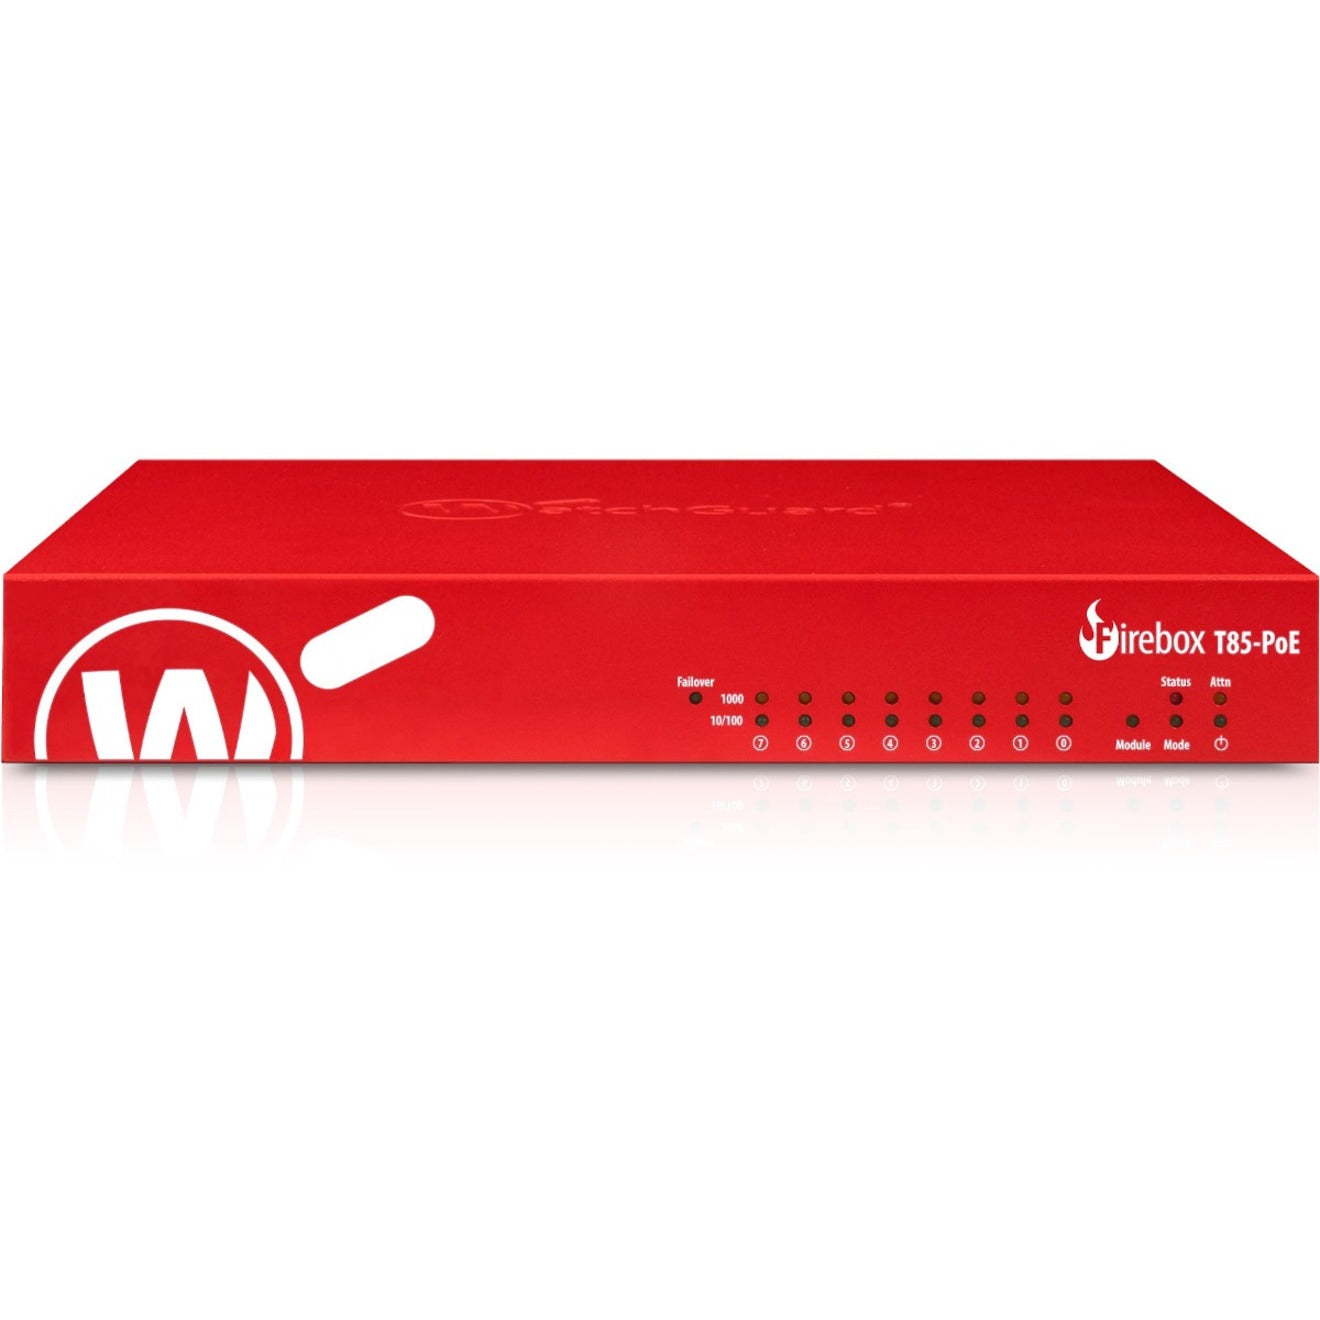 WatchGuard WGT85033-US Firebox T85-PoE Network Security/Firewall Appliance, 3 Year Basic Security Suite, 634.88 MB/s Firewall Throughput